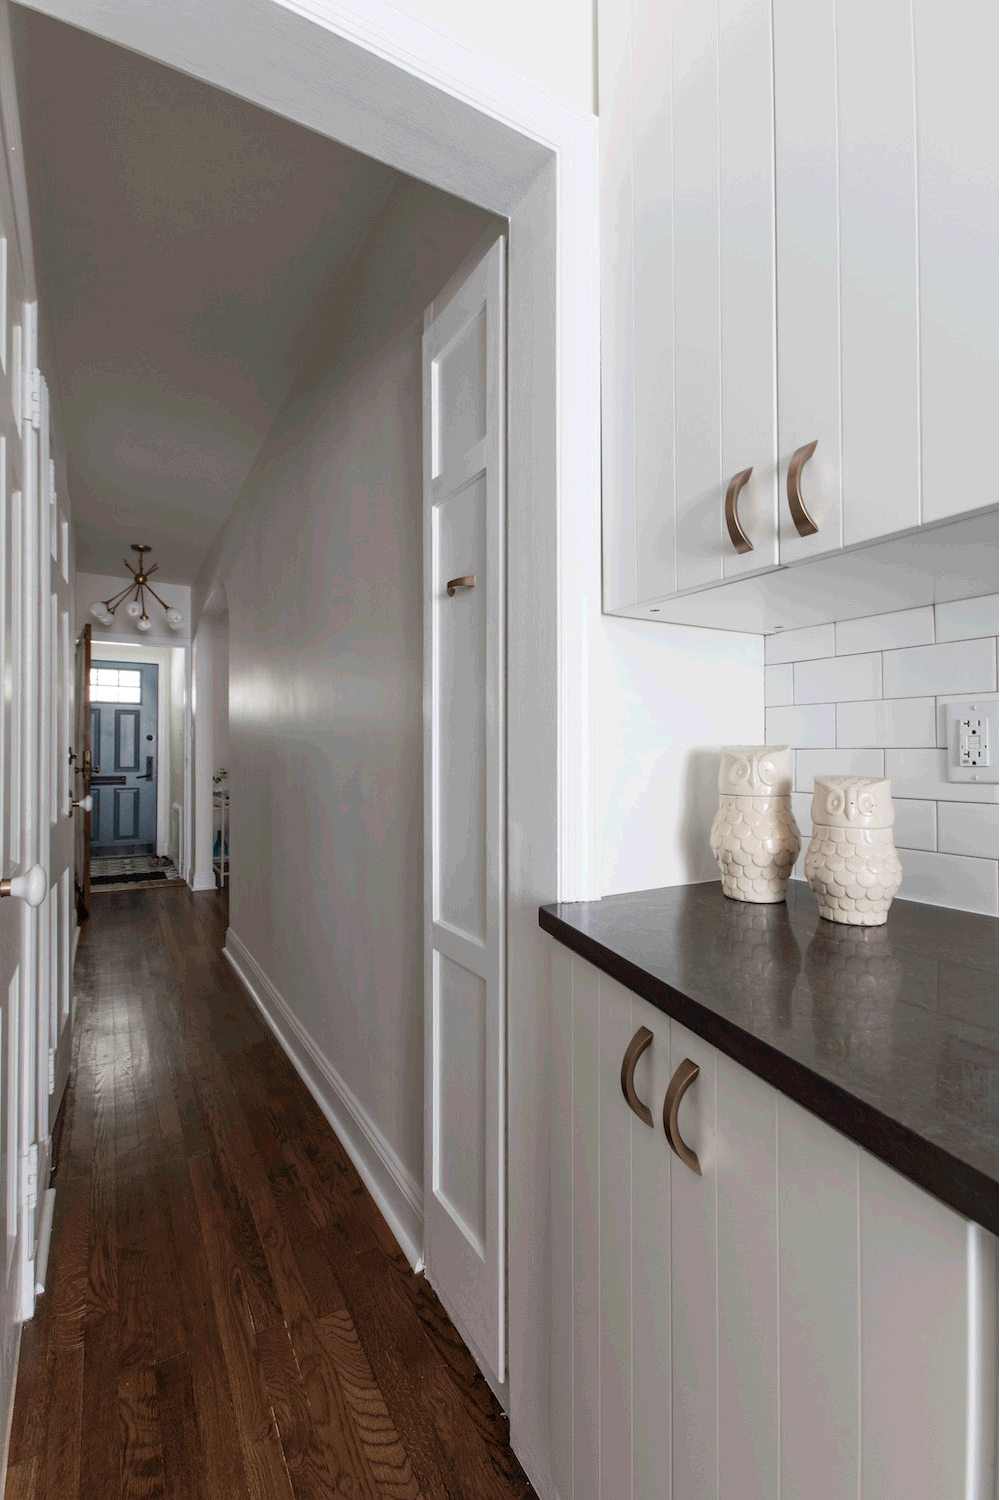 white kitchen cabinets and granite countertop and white backsplash in a wooden floored kitchen towards passageway after renovation